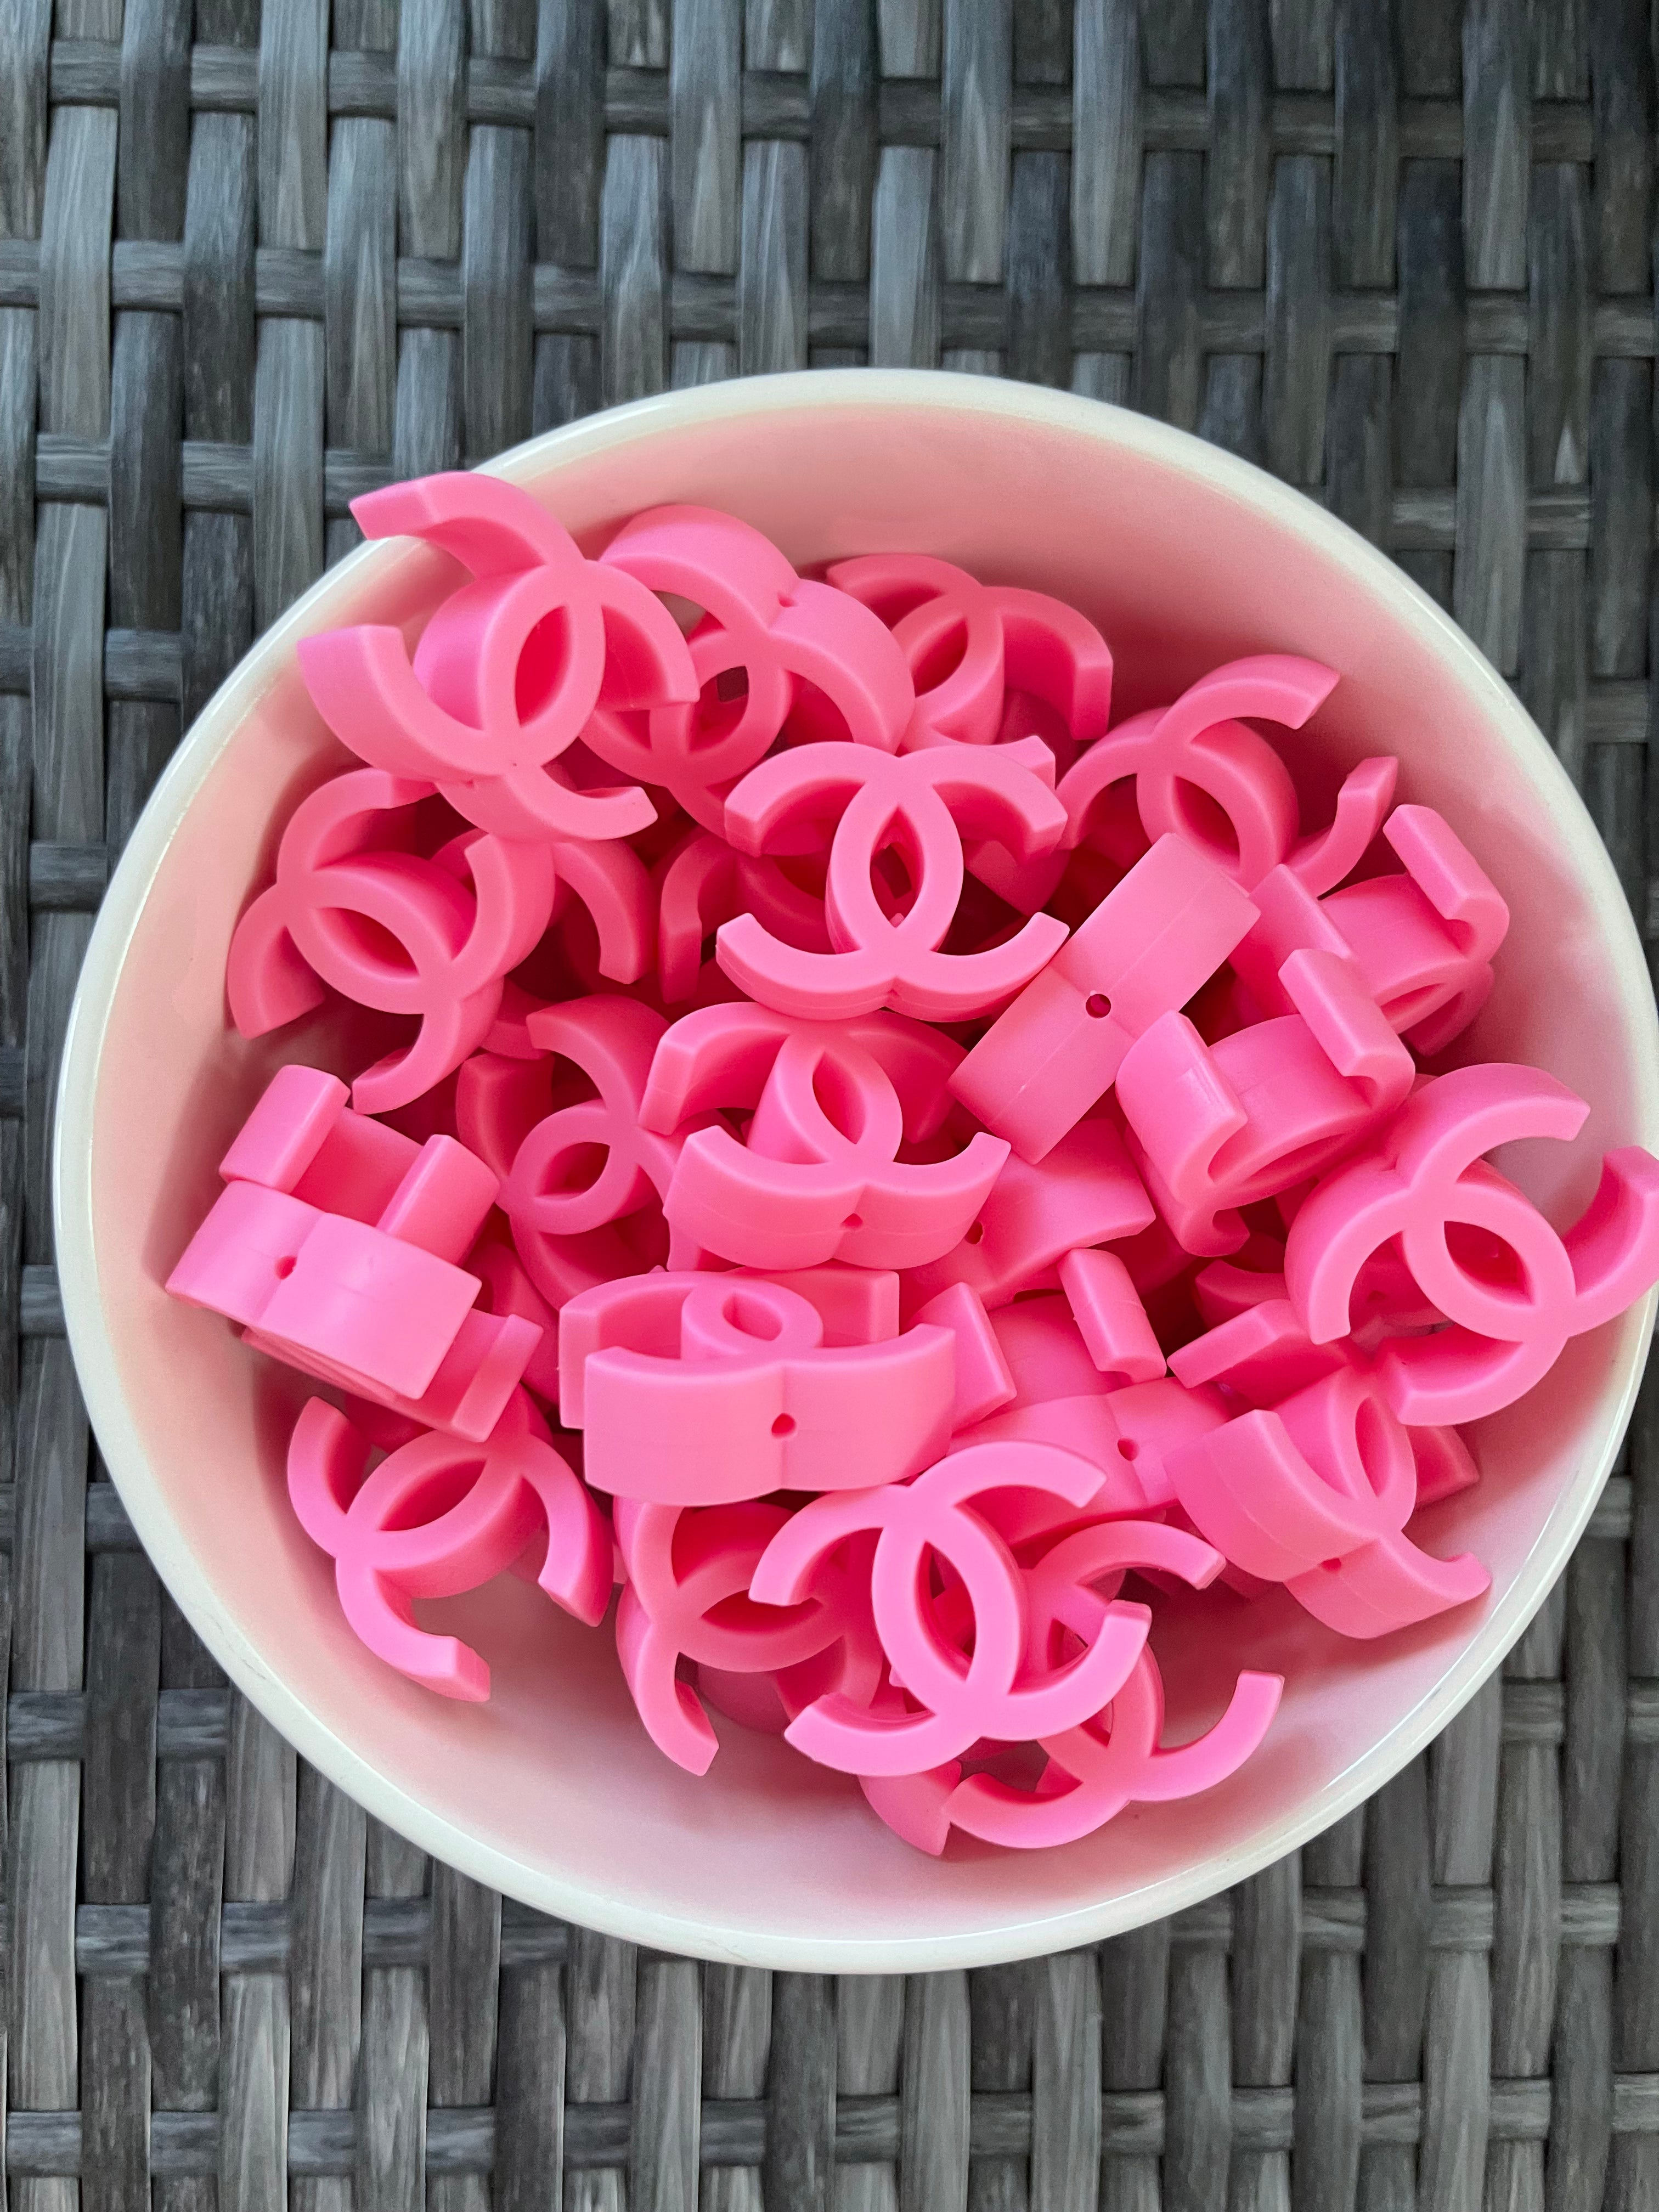 Silicone Focal LoVe (PINK) – A Friend In Bead (is a friend indeed)